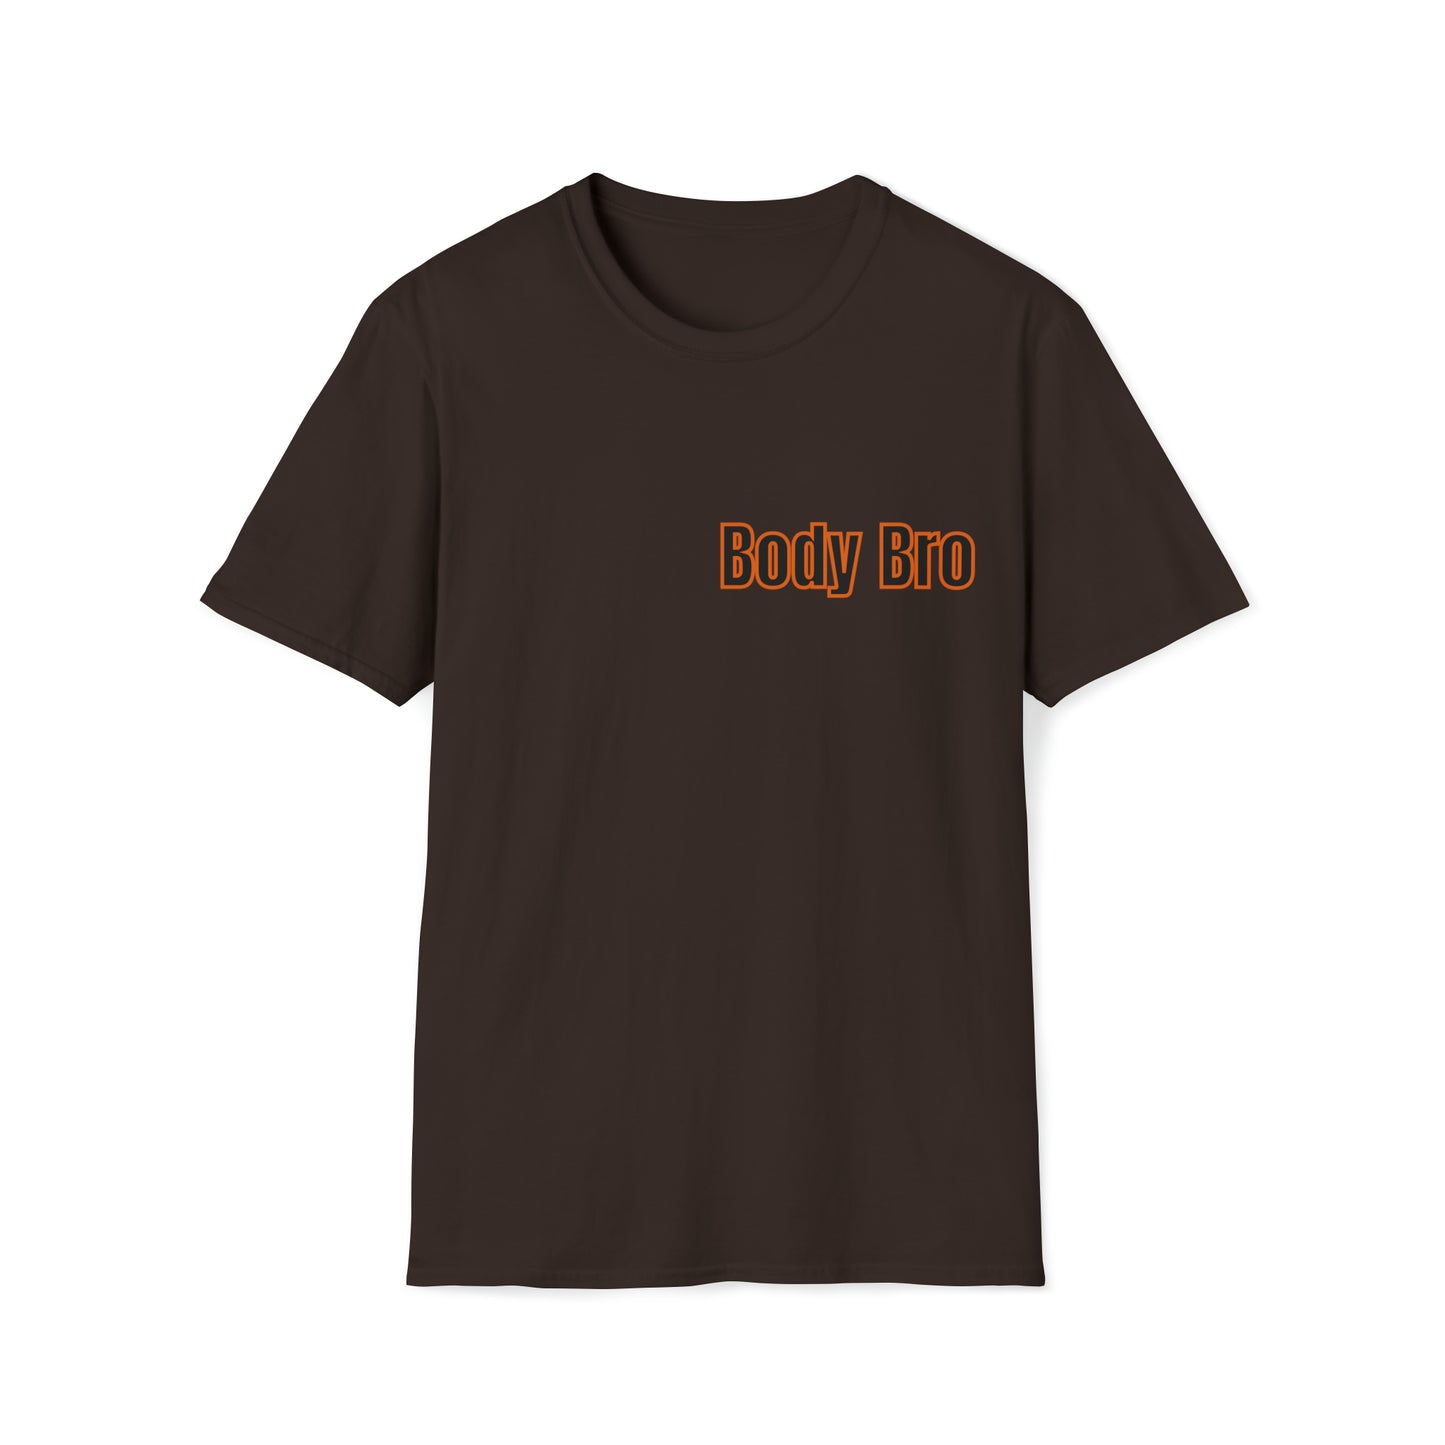 Body Bro Ball Butter Unisex Softstyle T-Shirt, Graphic Tee, Attitude T shirt, Gift for Bro's, Workout Motivation, Cozy Urban Wear, Stylish Unique top, Trendy outerwear